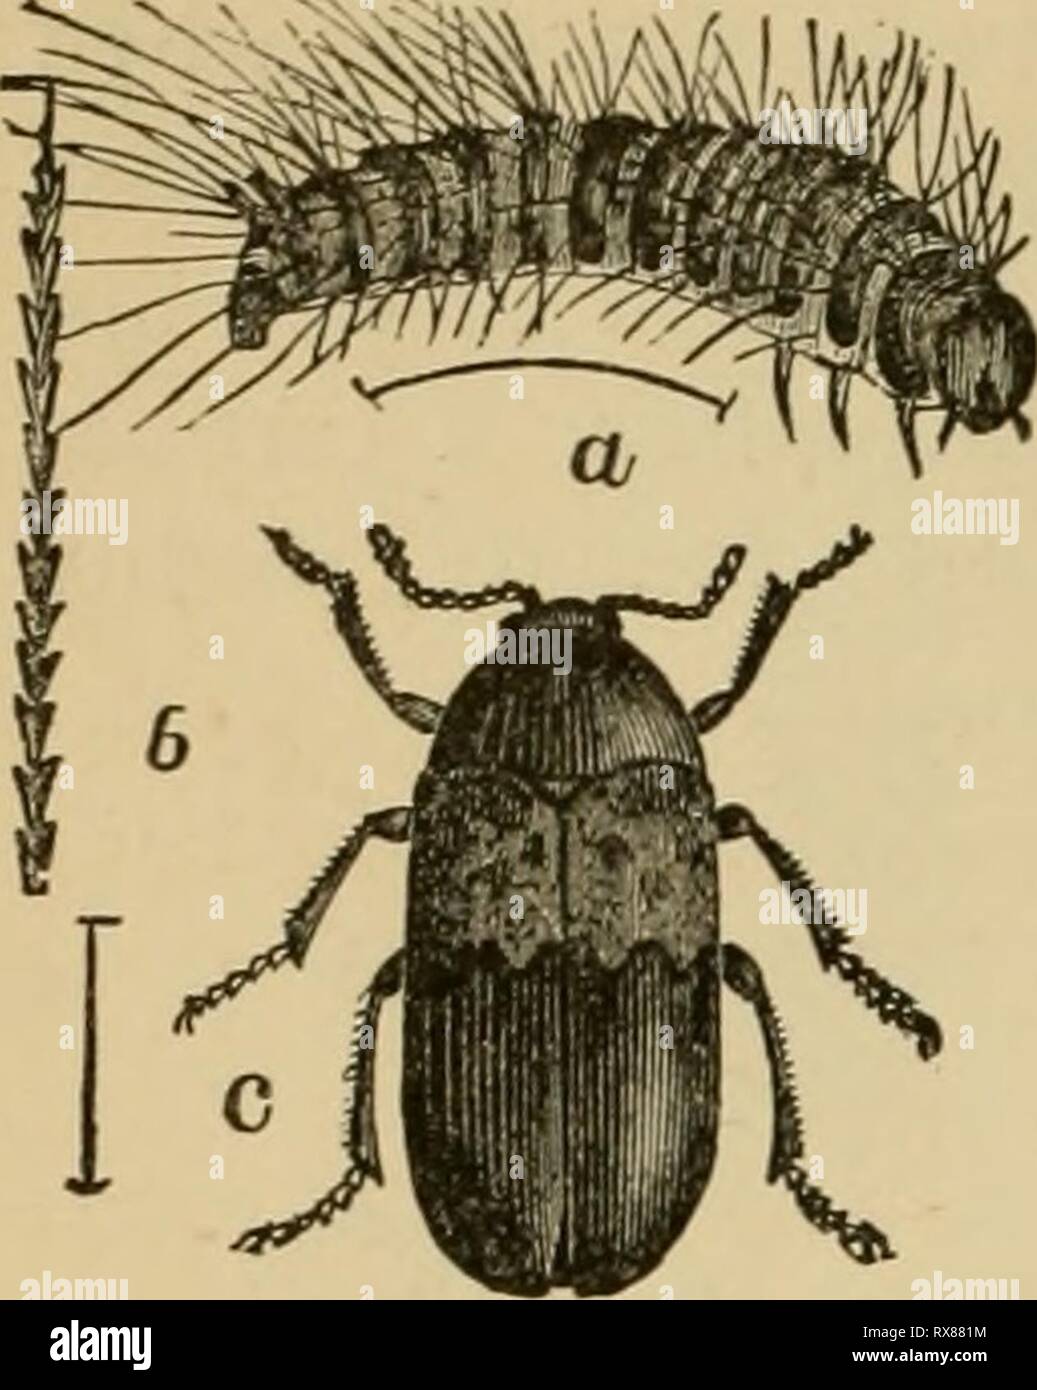 Economic entomology for the farmer Economic entomology for the farmer and the fruit grower, and for use as a text-book in agricultural schools and colleges; economicentomol00smit Year: 1906  178 AN ECONOMIC ENTOH/OLOGY. Fig. 156.   The larder-beetle, Dermes- tes lardariiis.—a, la'rva ; b, a single hair from larva ; c, adult beetle. These belong to the family Dermcstidce, which contains such nuisances as the 'larder-beetles,' 'carpet-beetles,' and 'mu- seum-beetles.' The elytra, which cover the abdomen completely, are black or gray, usually ornamented with white or colored scales, which sometim Stock Photo